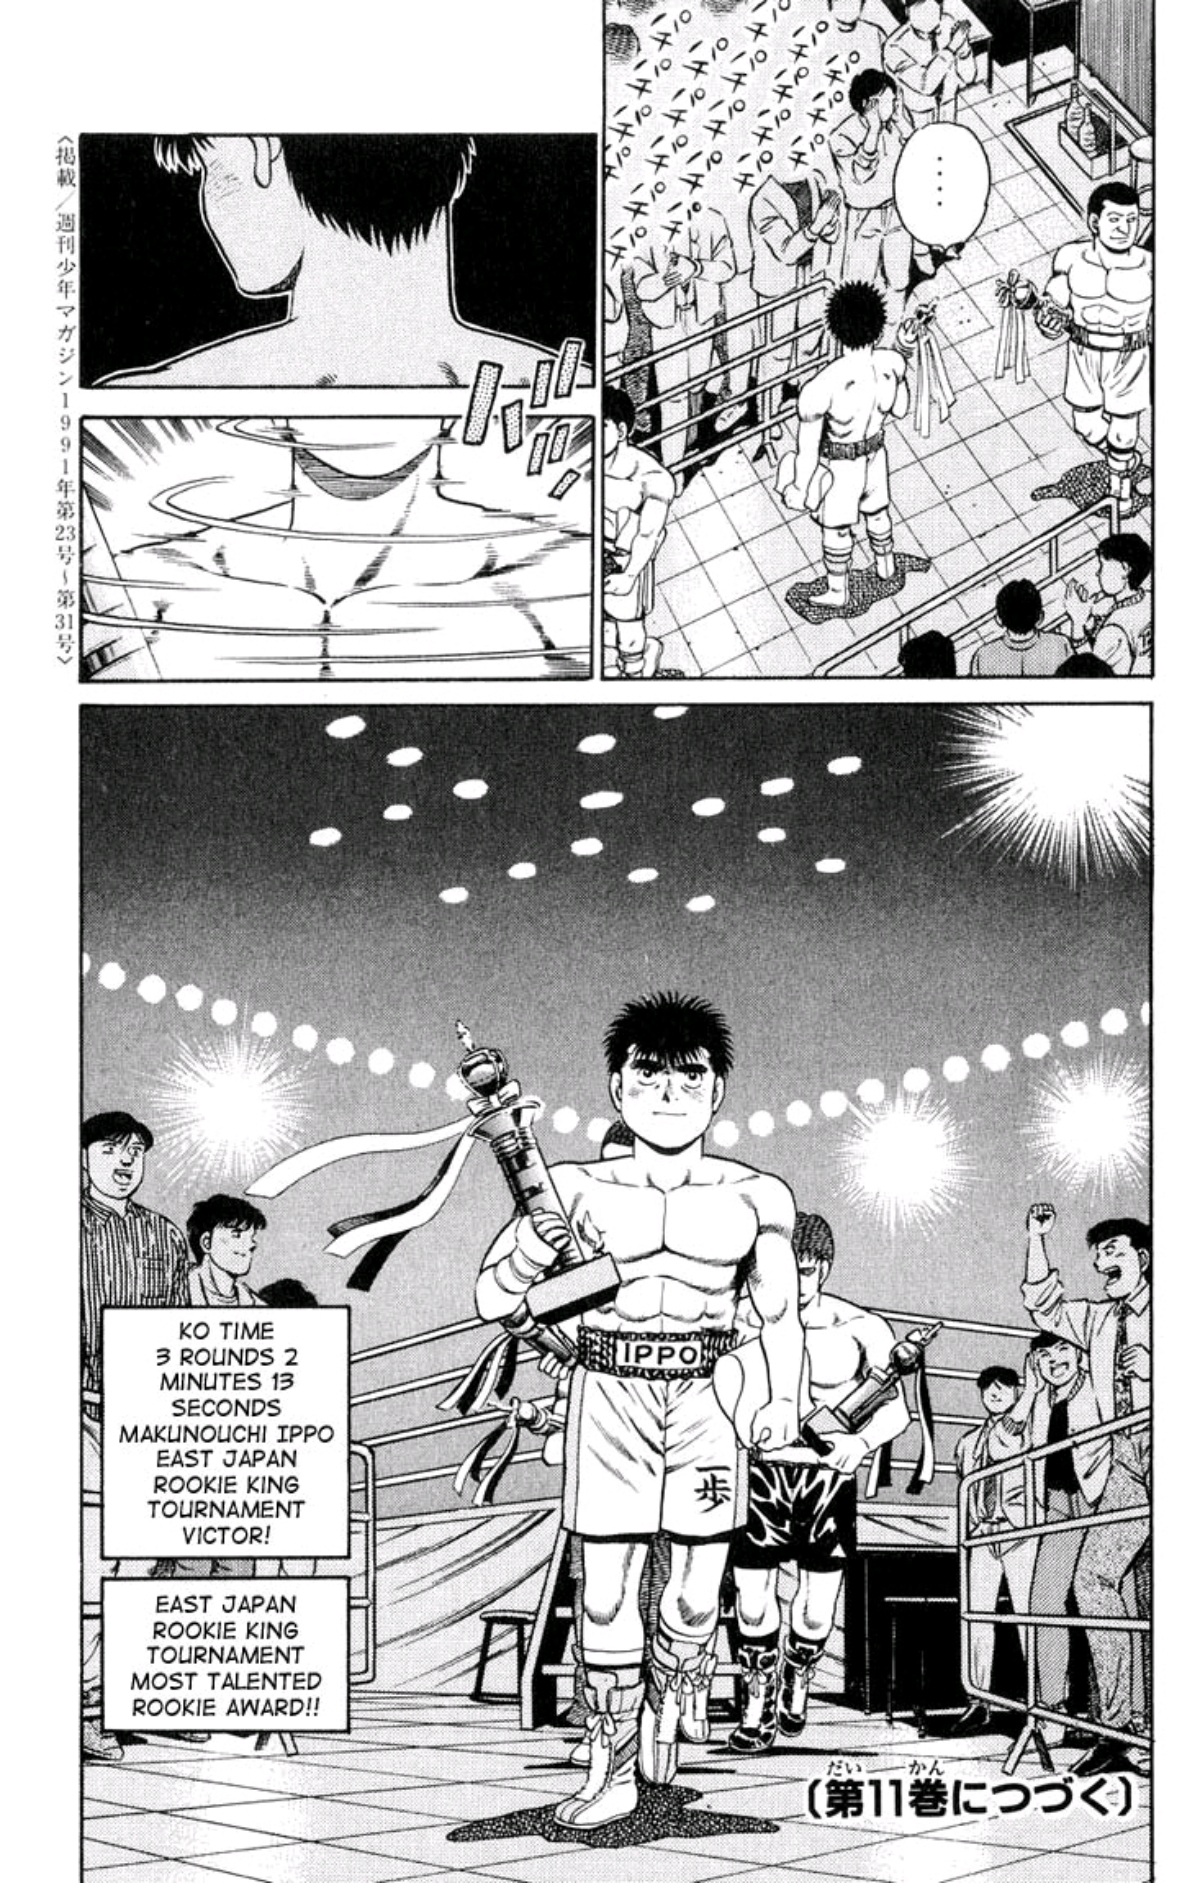 Ippo walks away from the ring, trophy in hand, the champions of other weight classes in line behind him. He is East Japan's most talented rookie. His record is 6 fights, 6 wins.